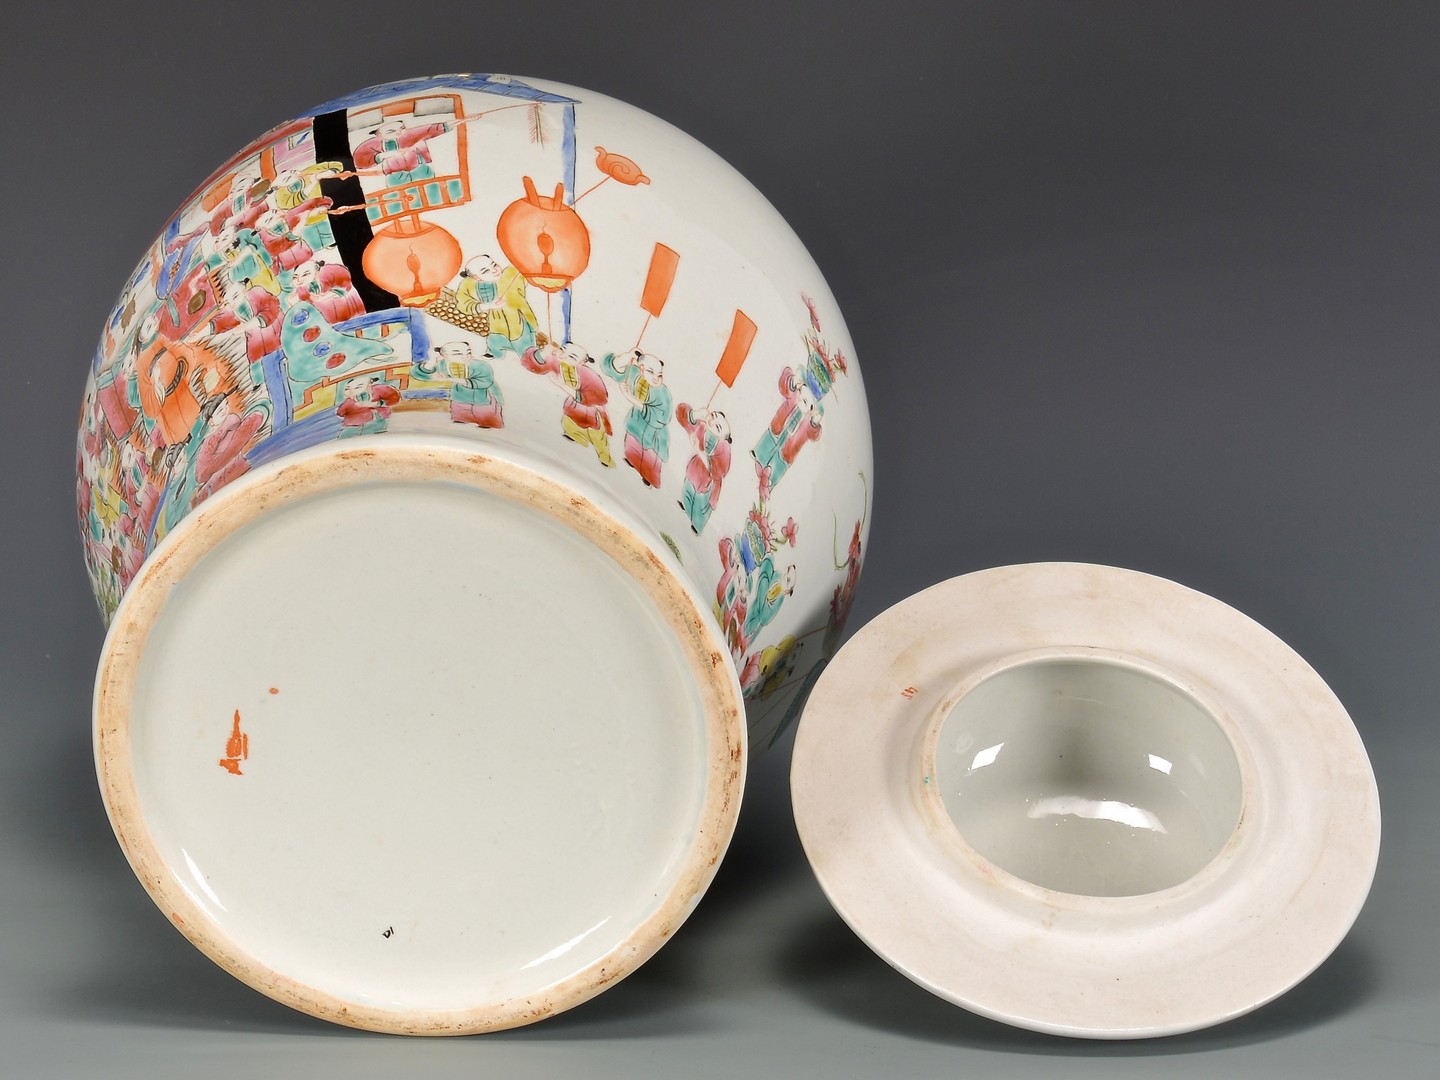 Lot 408: Temple Jar, Chinese New Year scene